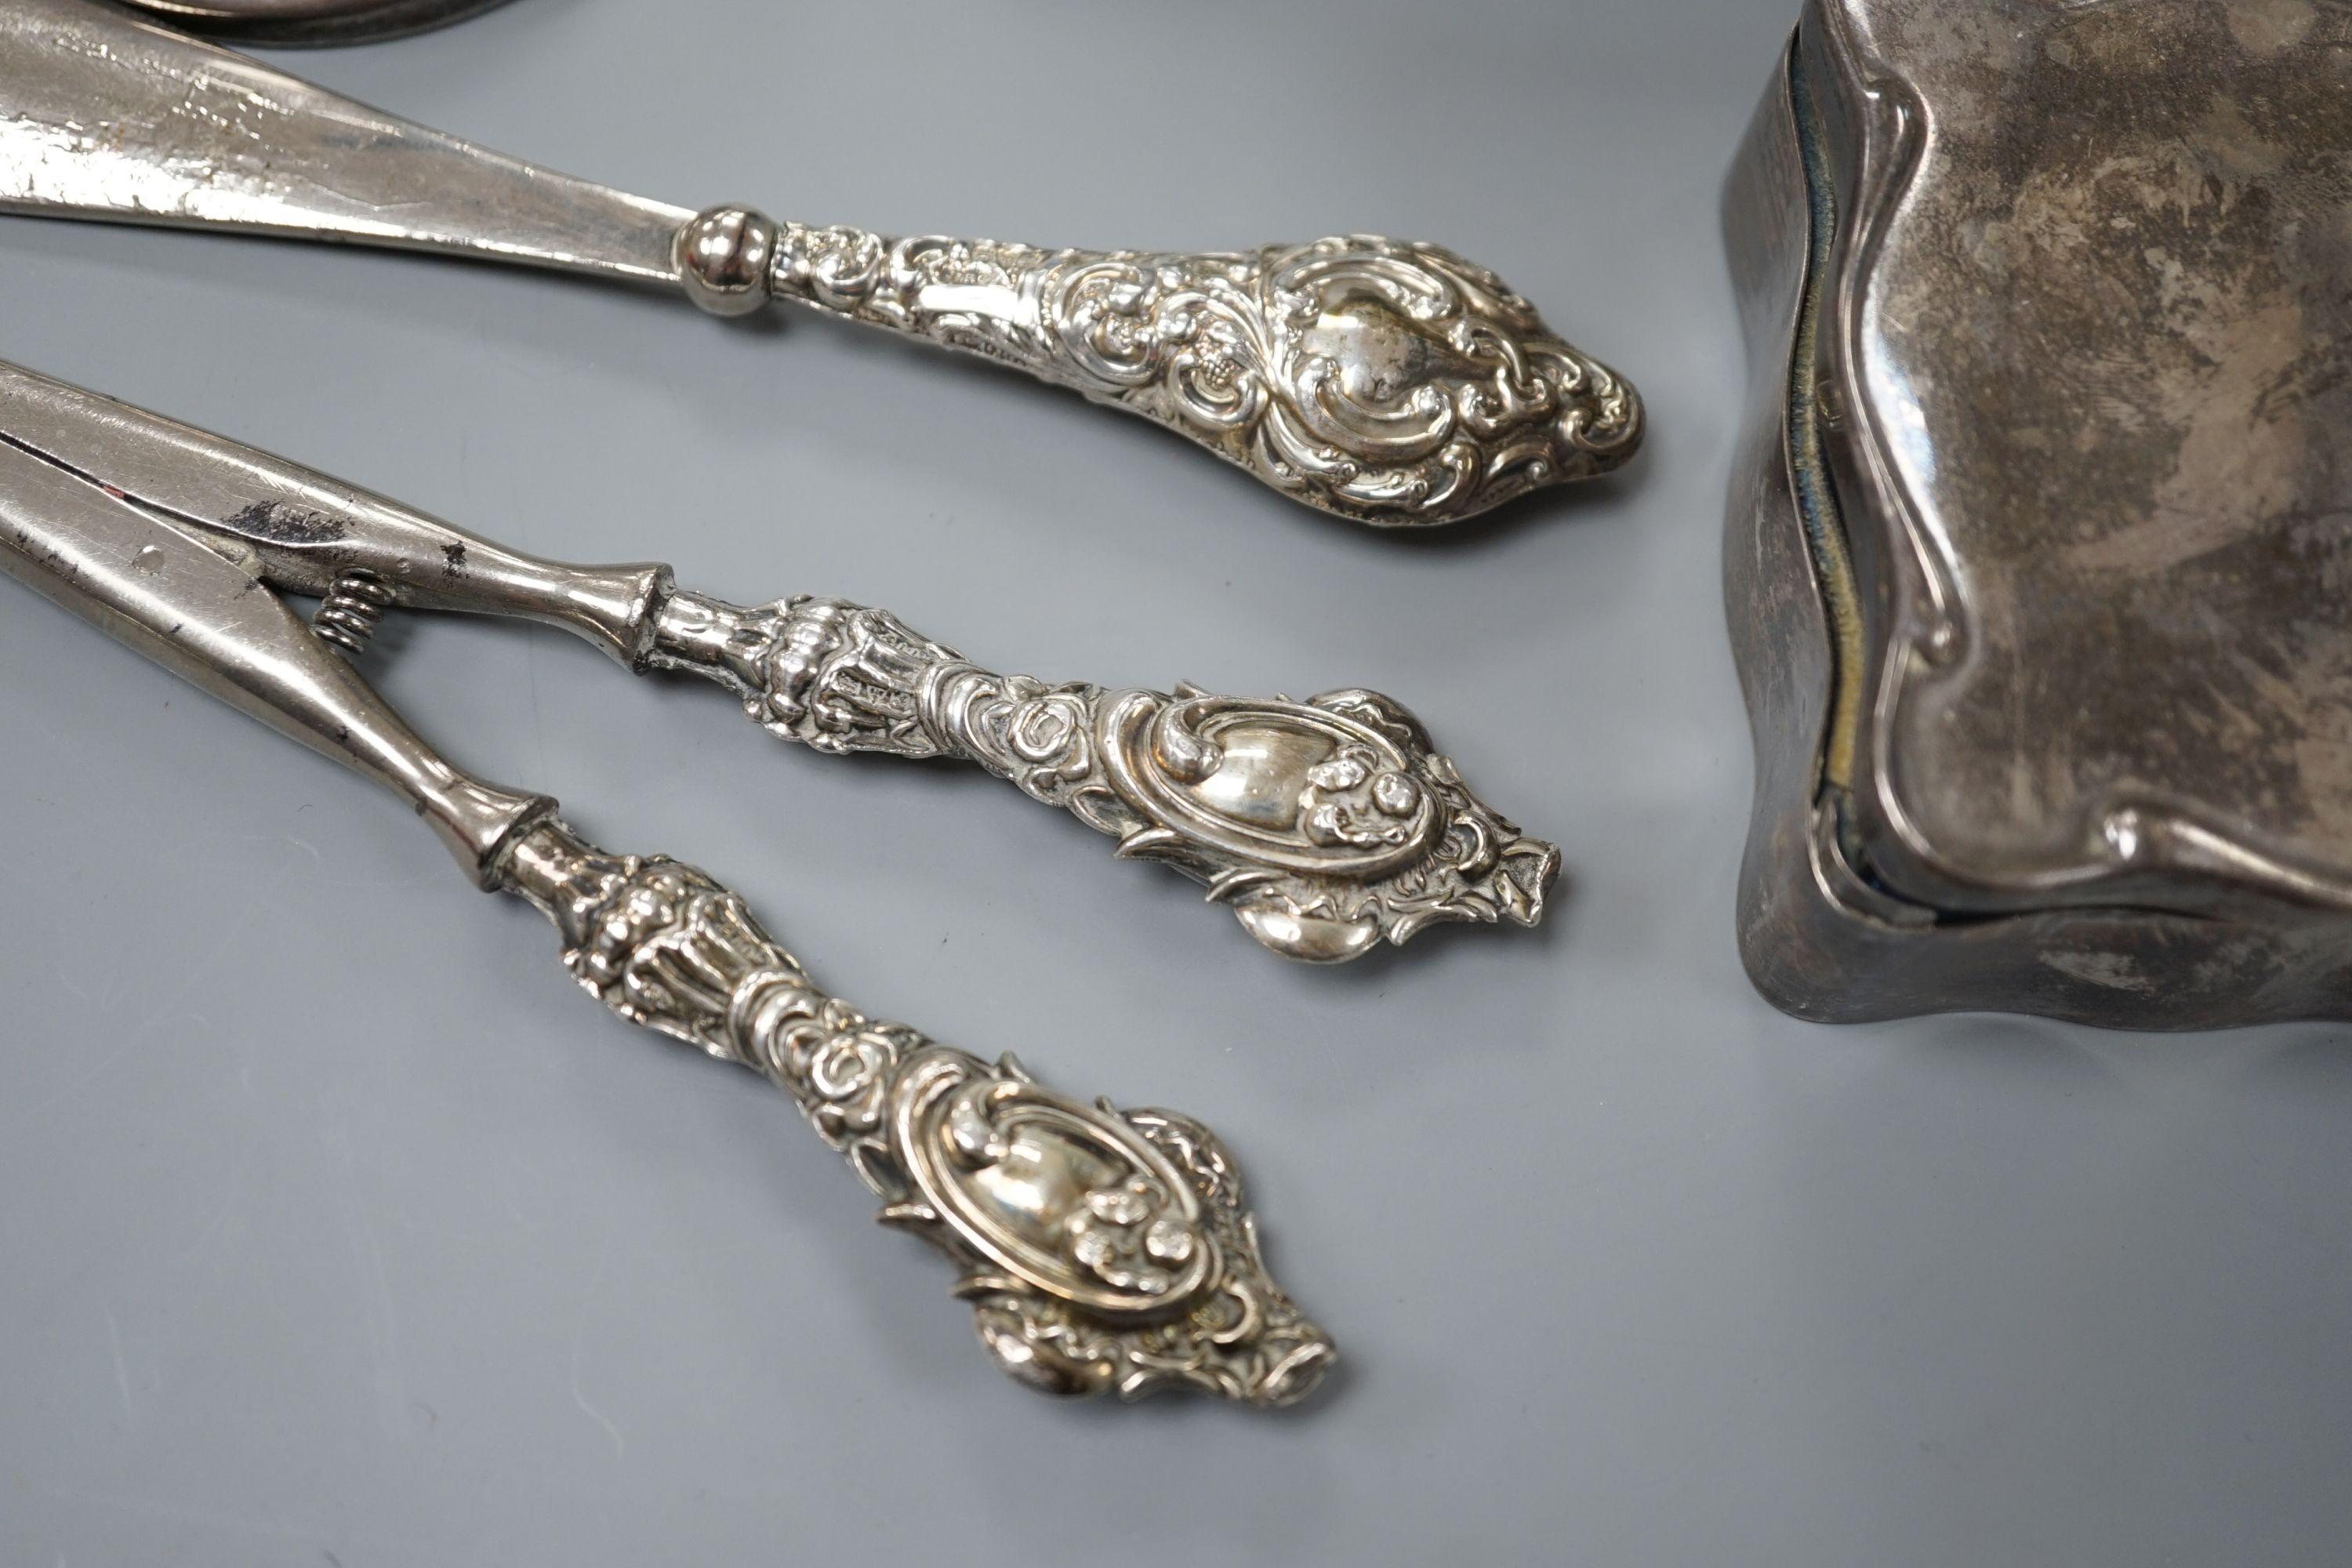 A George V silver mounted hat pin stand, two silver spoons, a silver mounted trinket box, a pair of glove stretchers and a shoe horn.